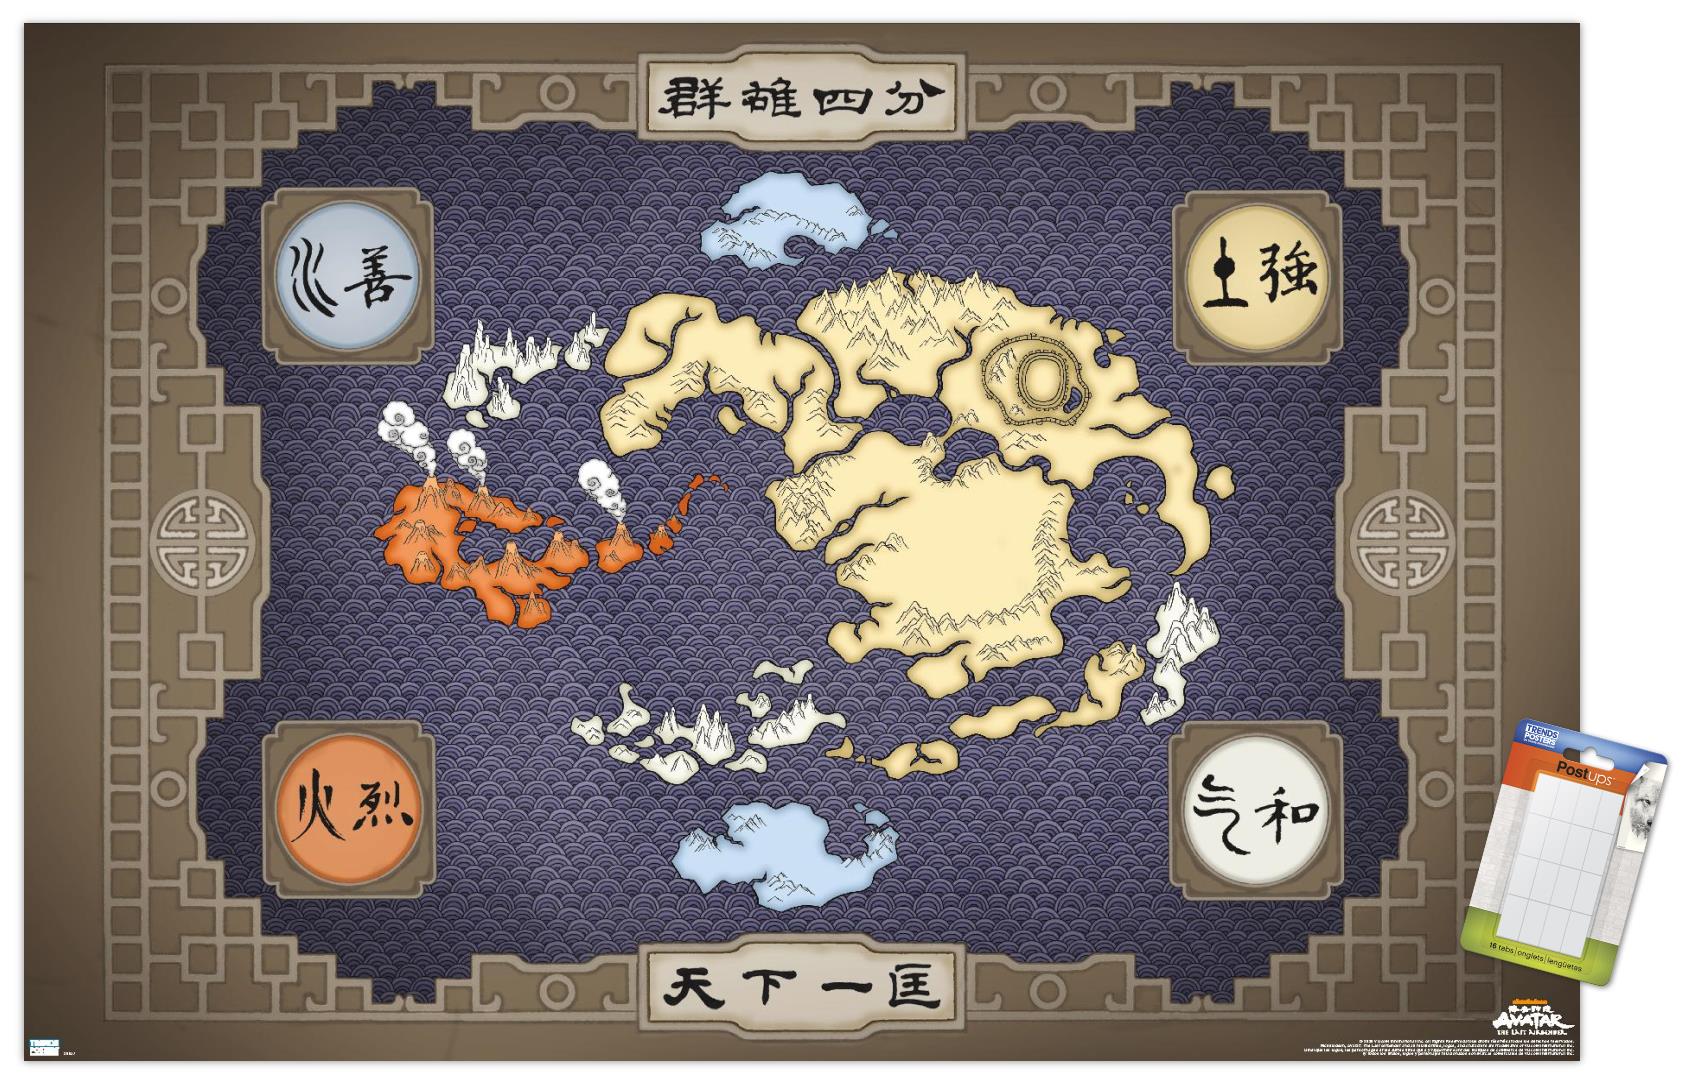 Avatar - Map Wall Poster, 14.725" x 22.375" - image 1 of 6